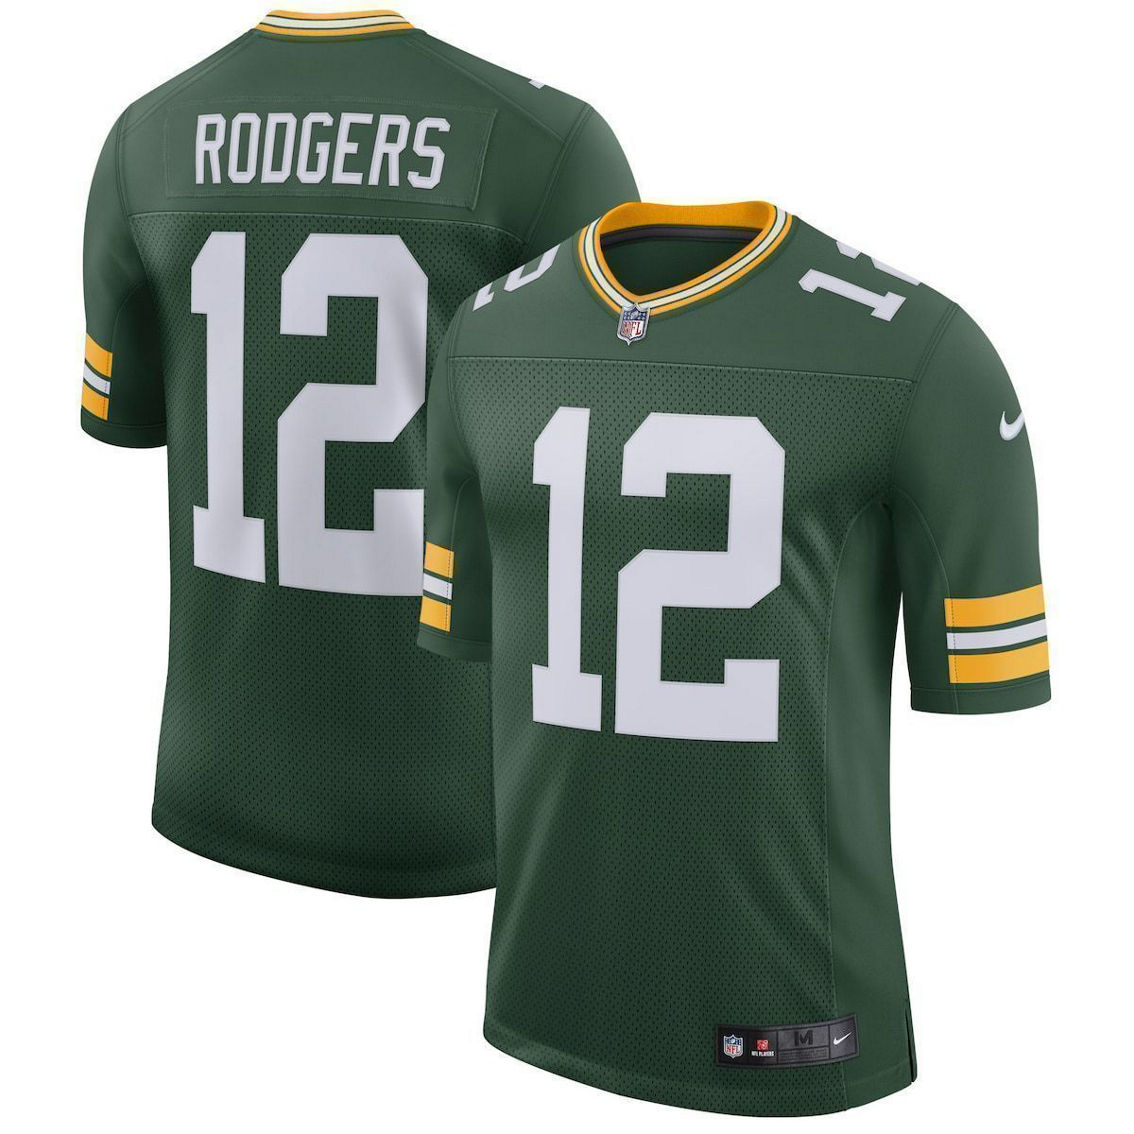 Nike Men's Aaron Rodgers Green Green Bay Packers Classic Limited Player Jersey - Image 2 of 4